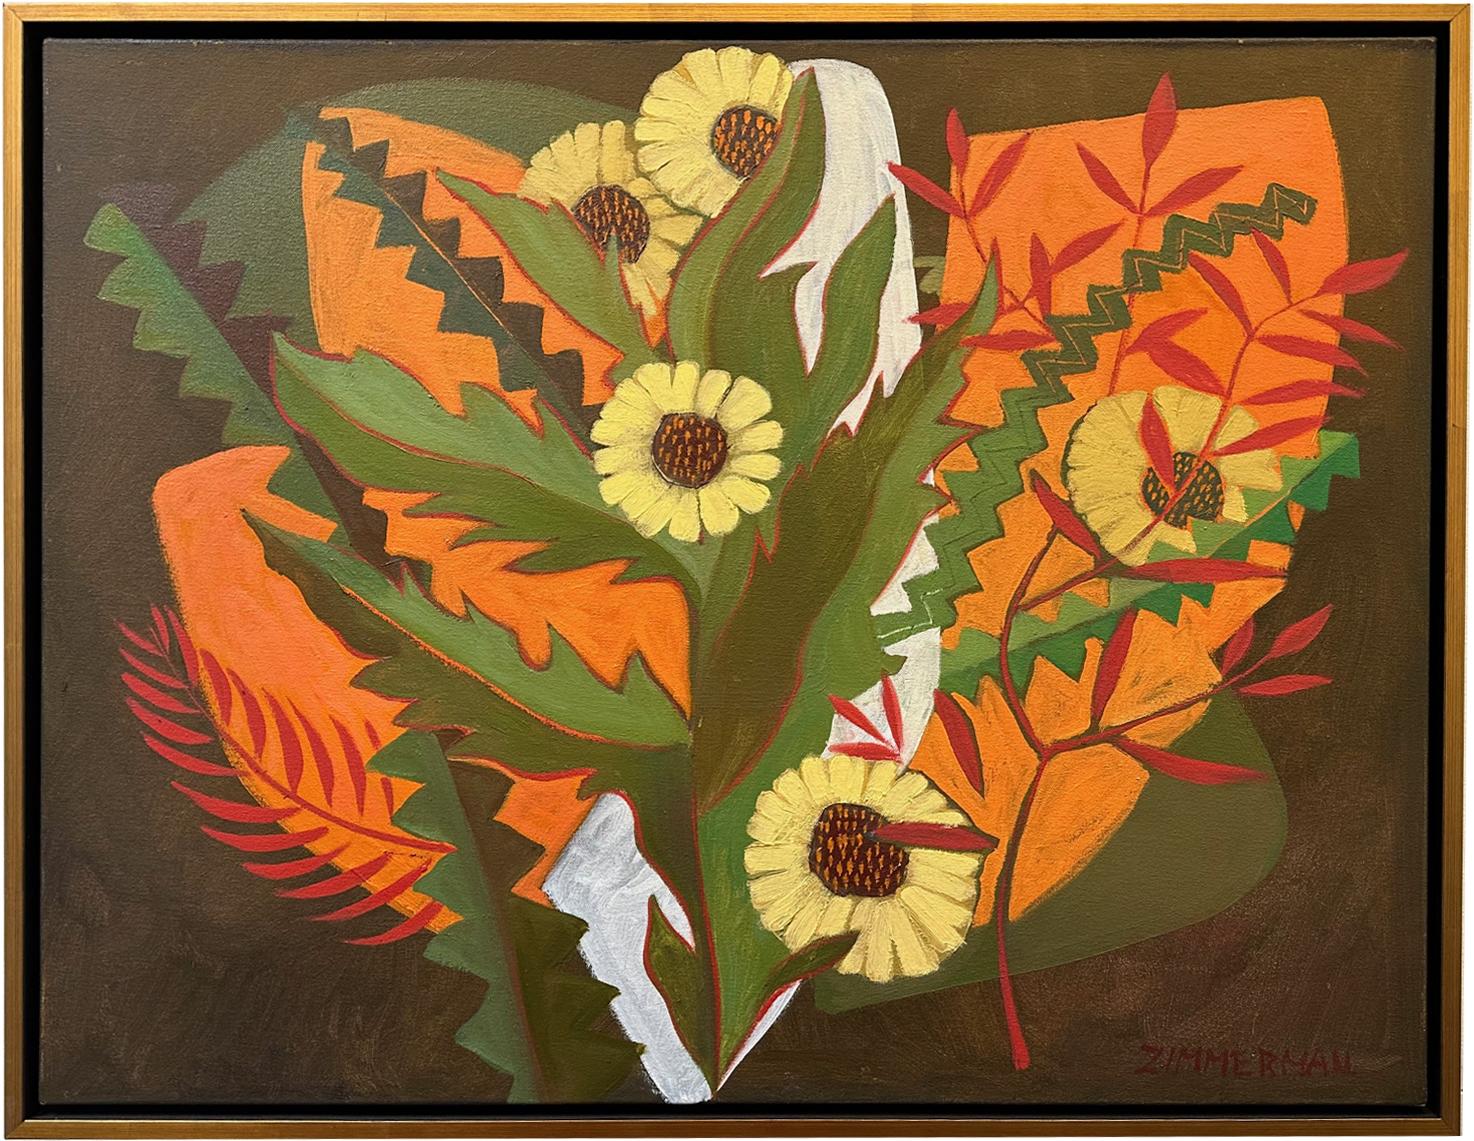 'Floral on Orange Background' , oil on canvas , framed, by Marc Zimmerman

This masterpiece is exhibited in the Zimmerman Gallery, Carmel CA.

The painting comes with a certificate of authenticity and a letter of appraisal.

Marc Zimmerman creates